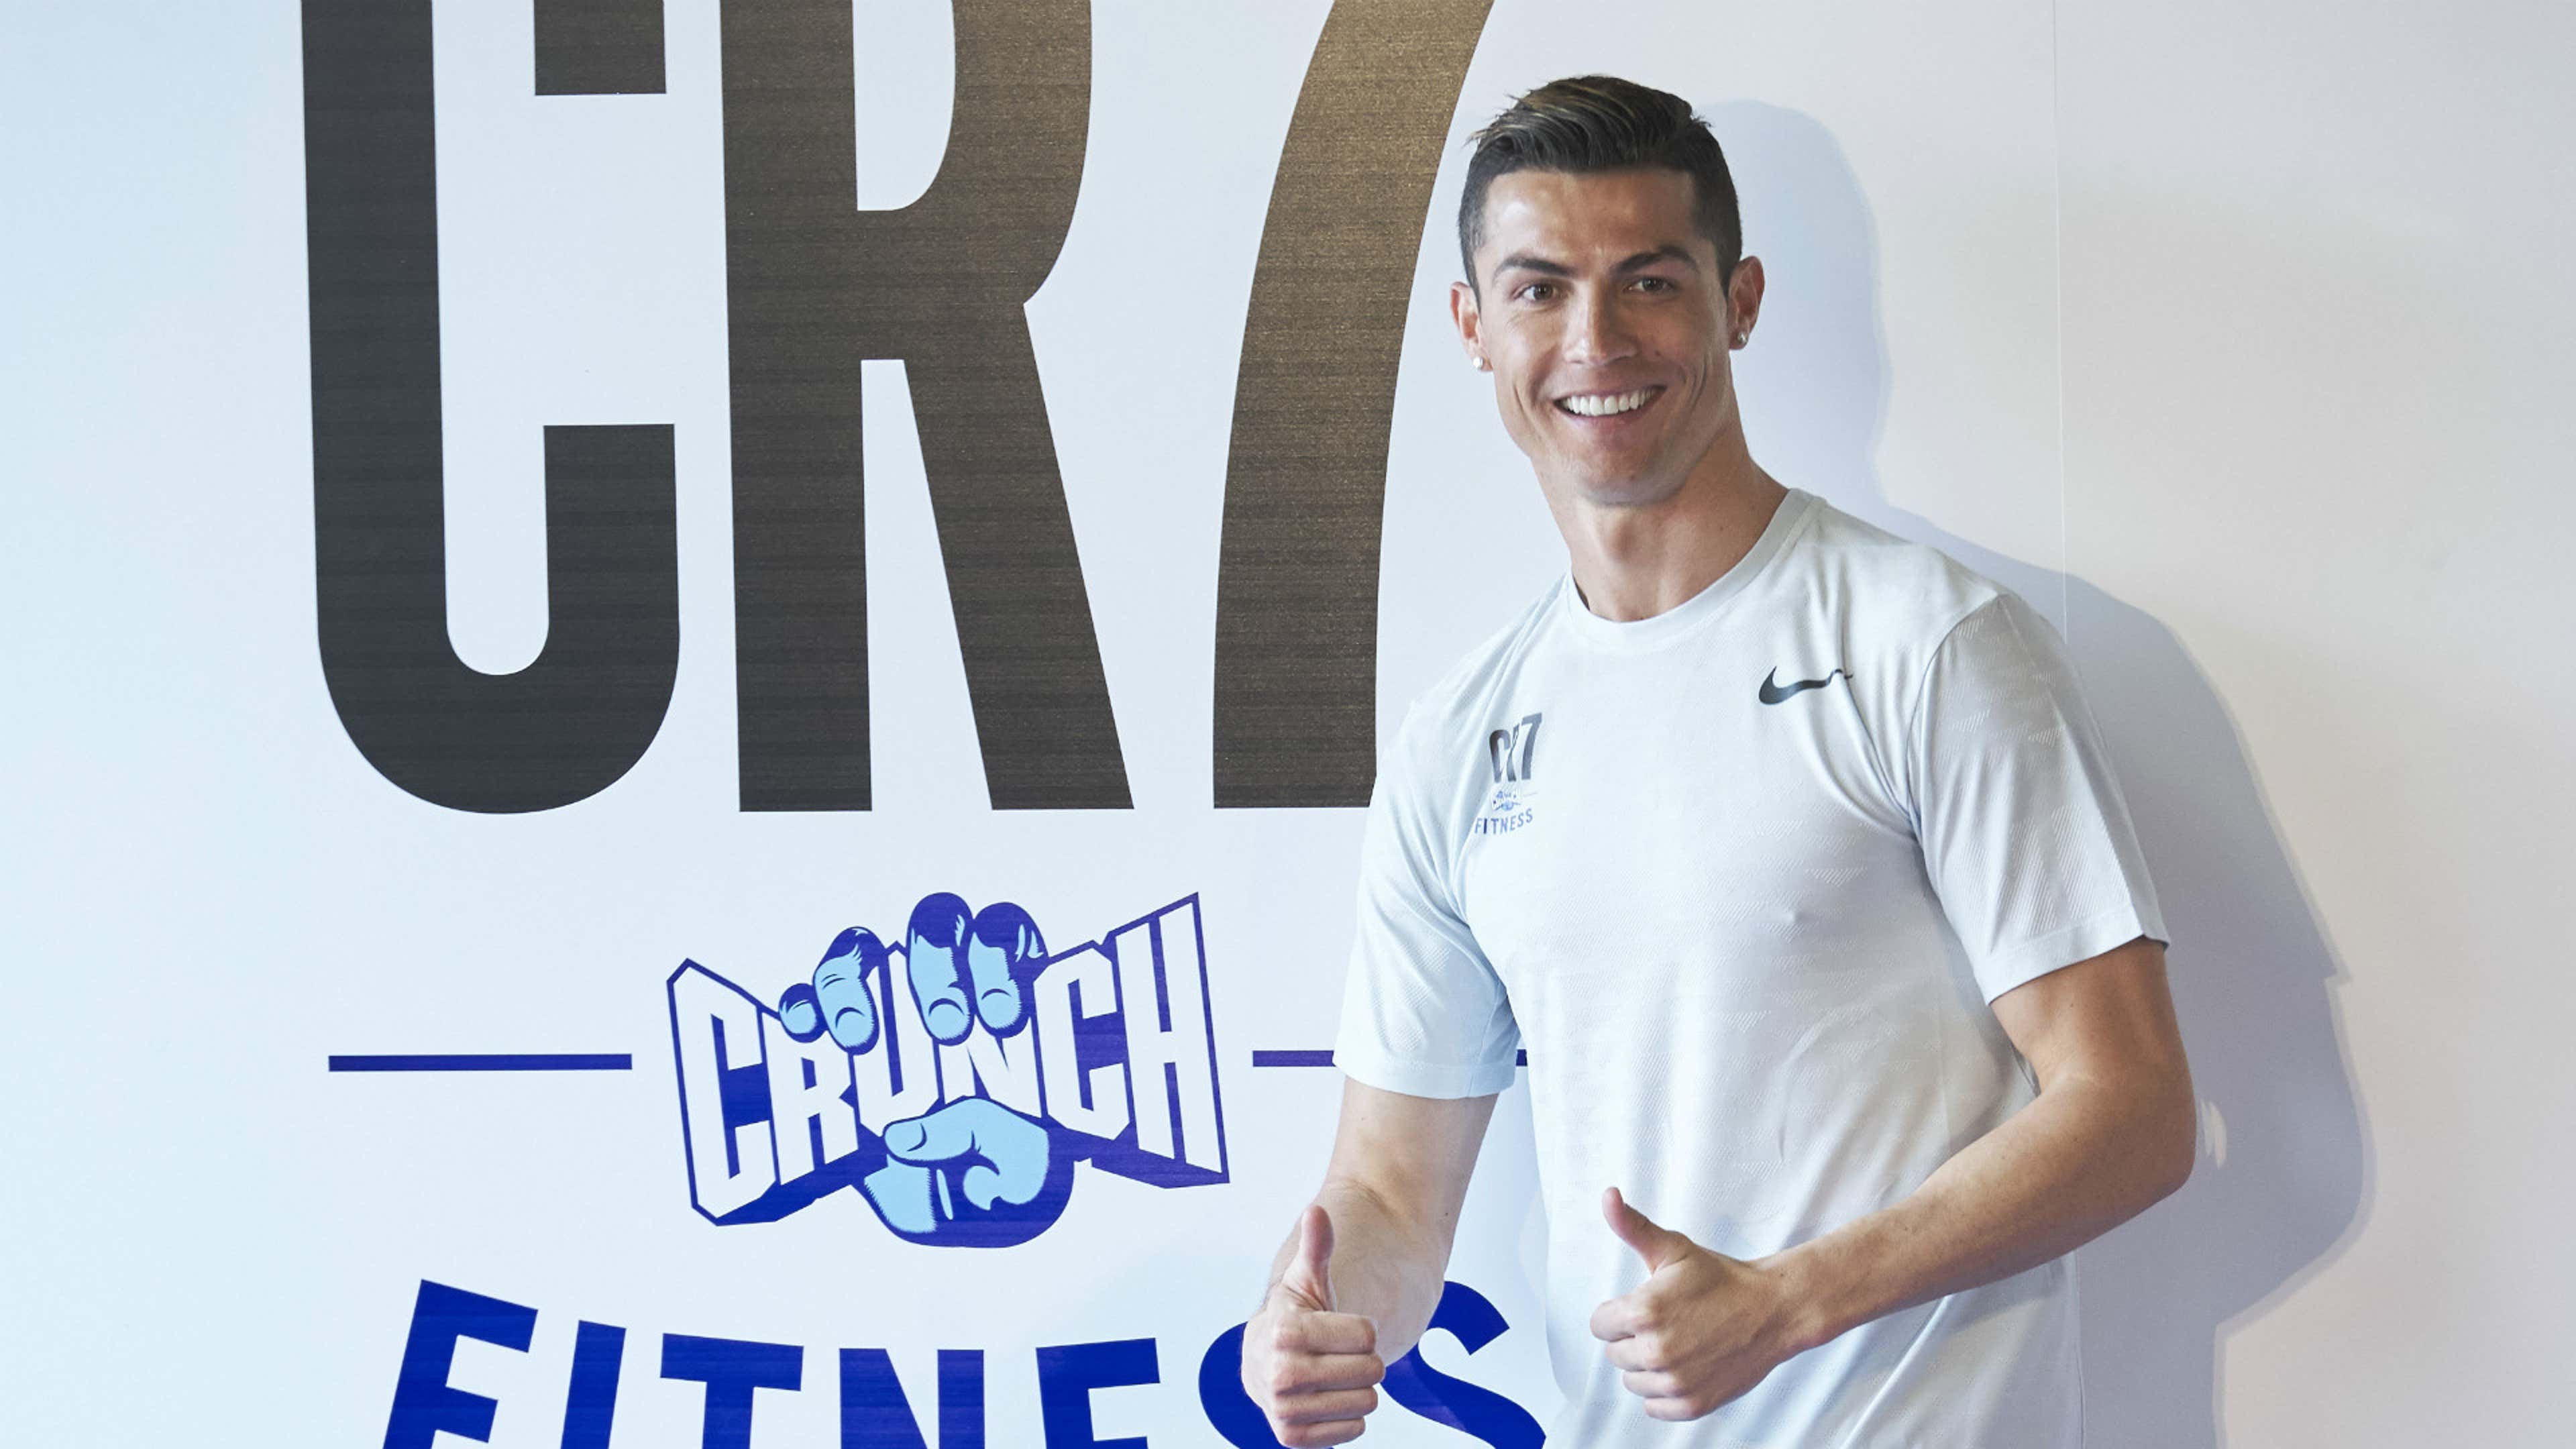 Gyms, blankets & hotels: Cristiano Ronaldo's business empire